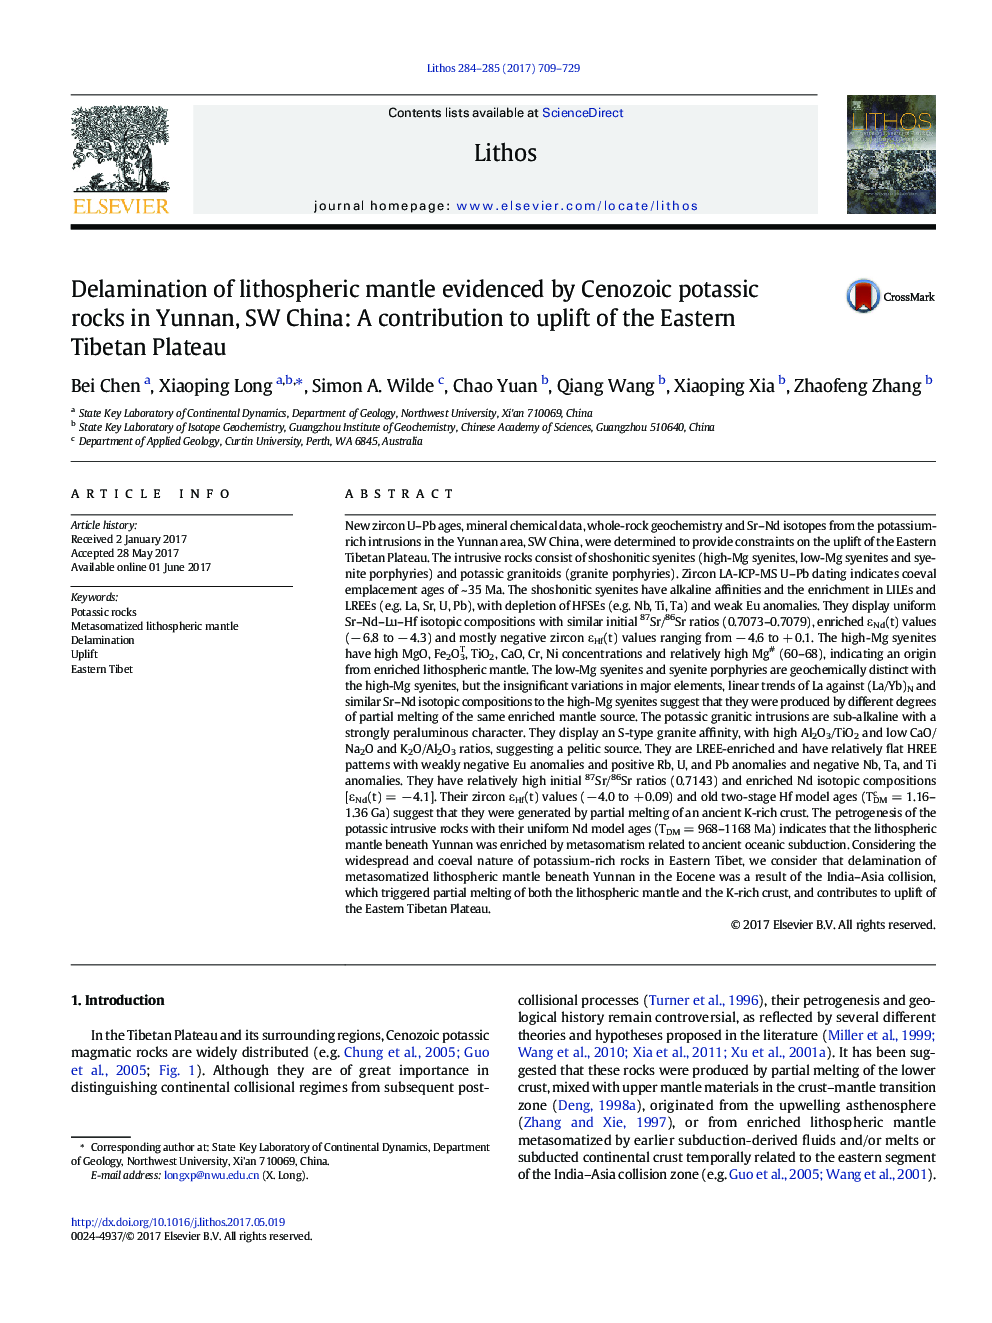 Delamination of lithospheric mantle evidenced by Cenozoic potassic rocks in Yunnan, SW China: A contribution to uplift of the Eastern Tibetan Plateau